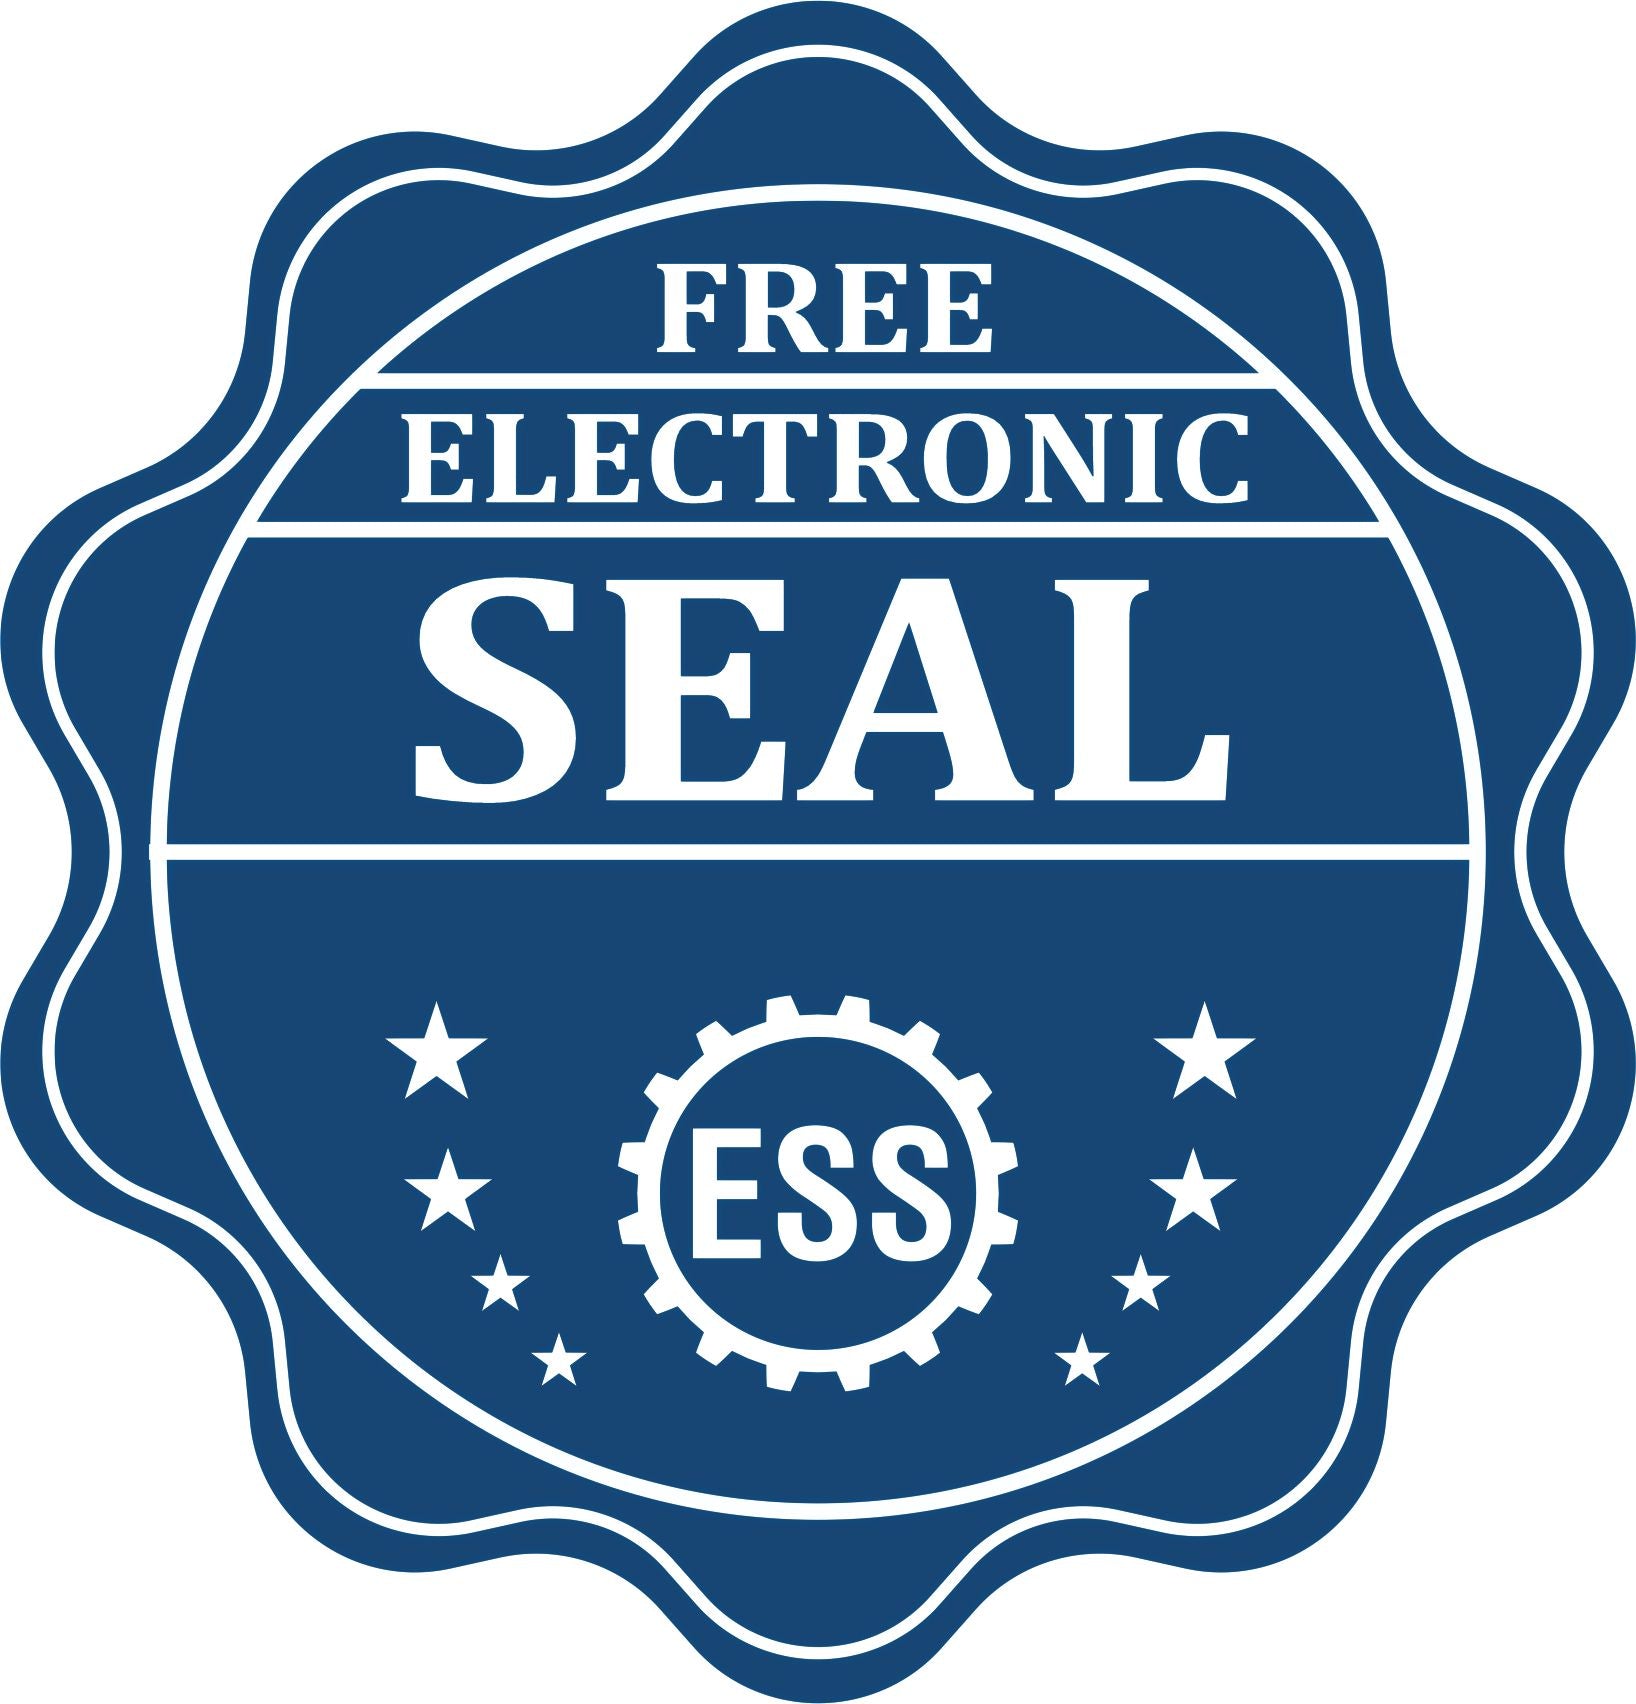 A badge showing a free electronic seal for the Soft South Dakota Professional Engineer Seal with stars and the ESS gear on the emblem.